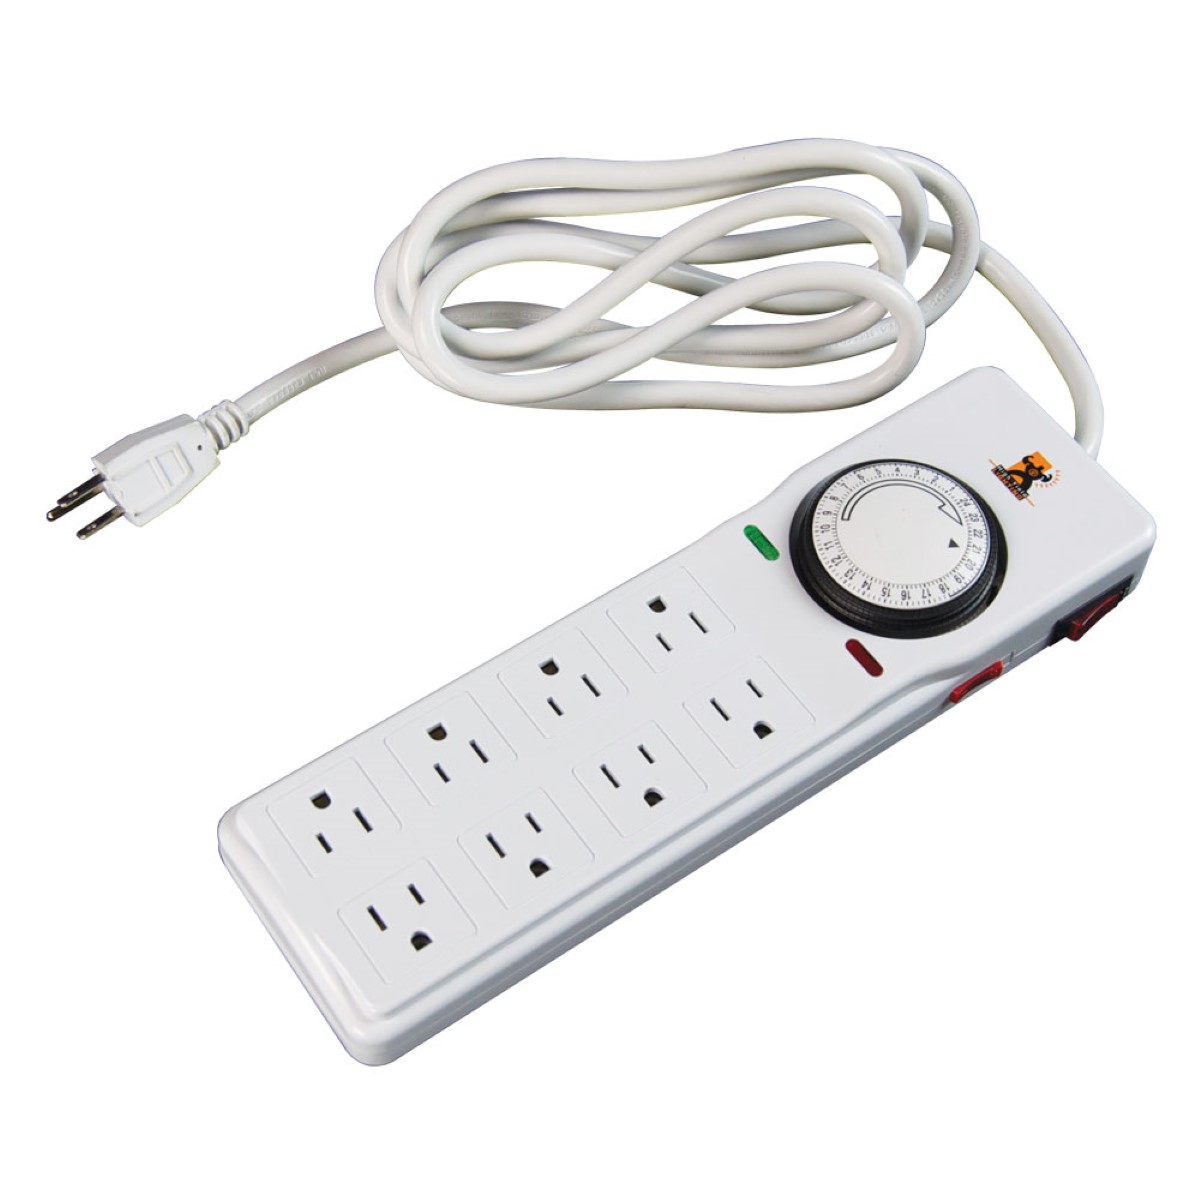 BN-LINK Outdoor Power Strip with Programmable Mechanical Timer